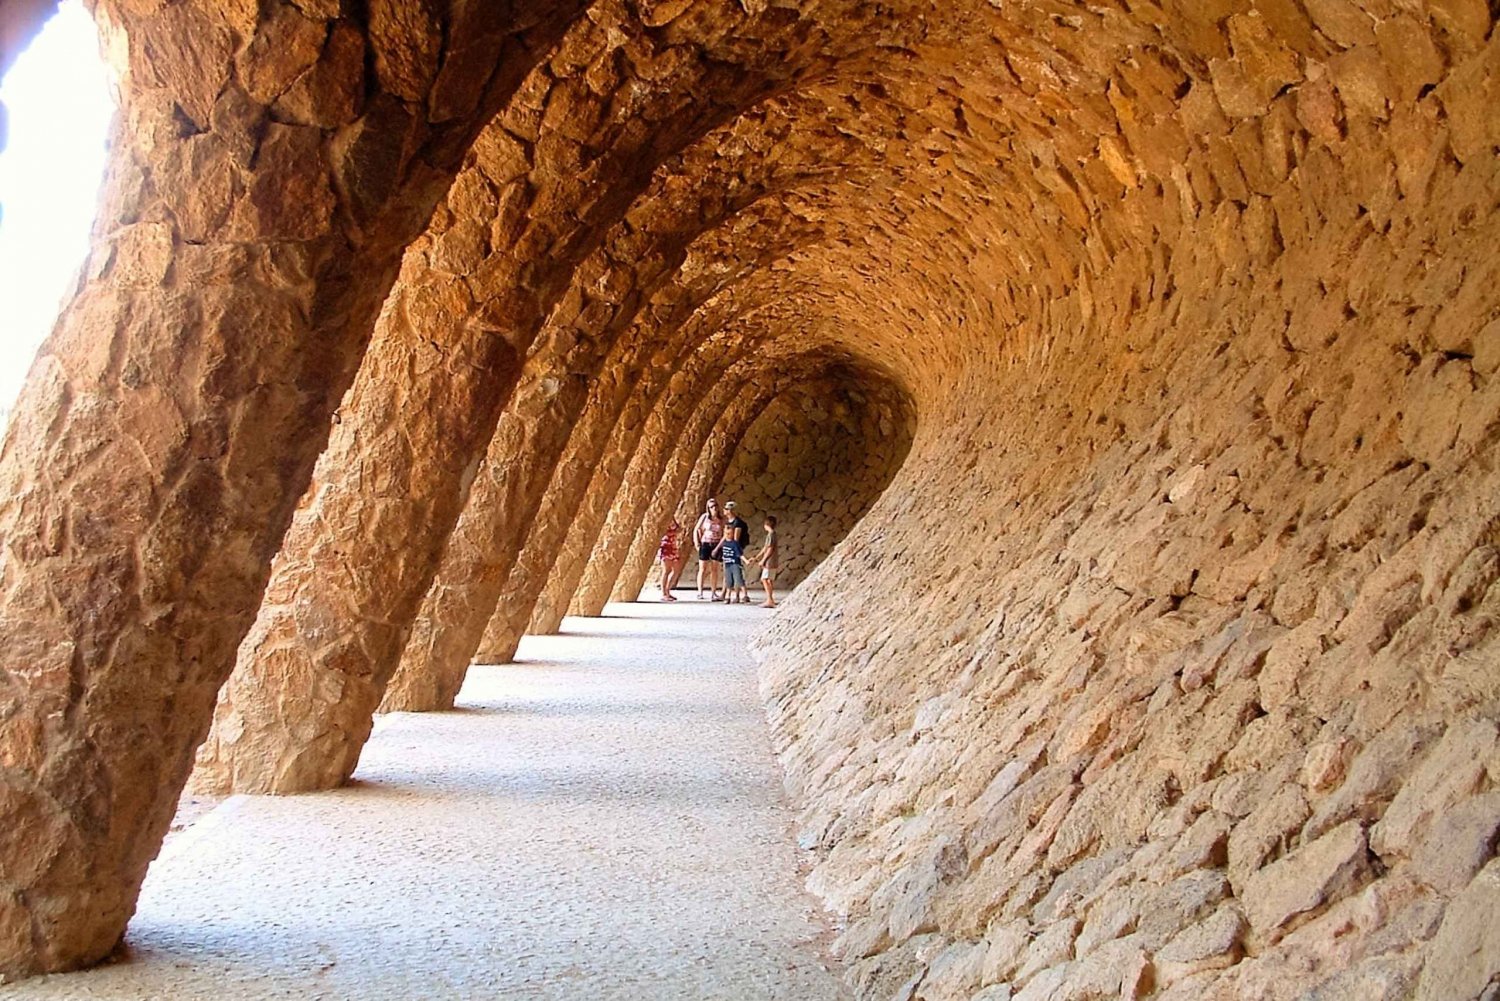 Barcelona & Park Güell: Private Half-Day Tour with Pickup